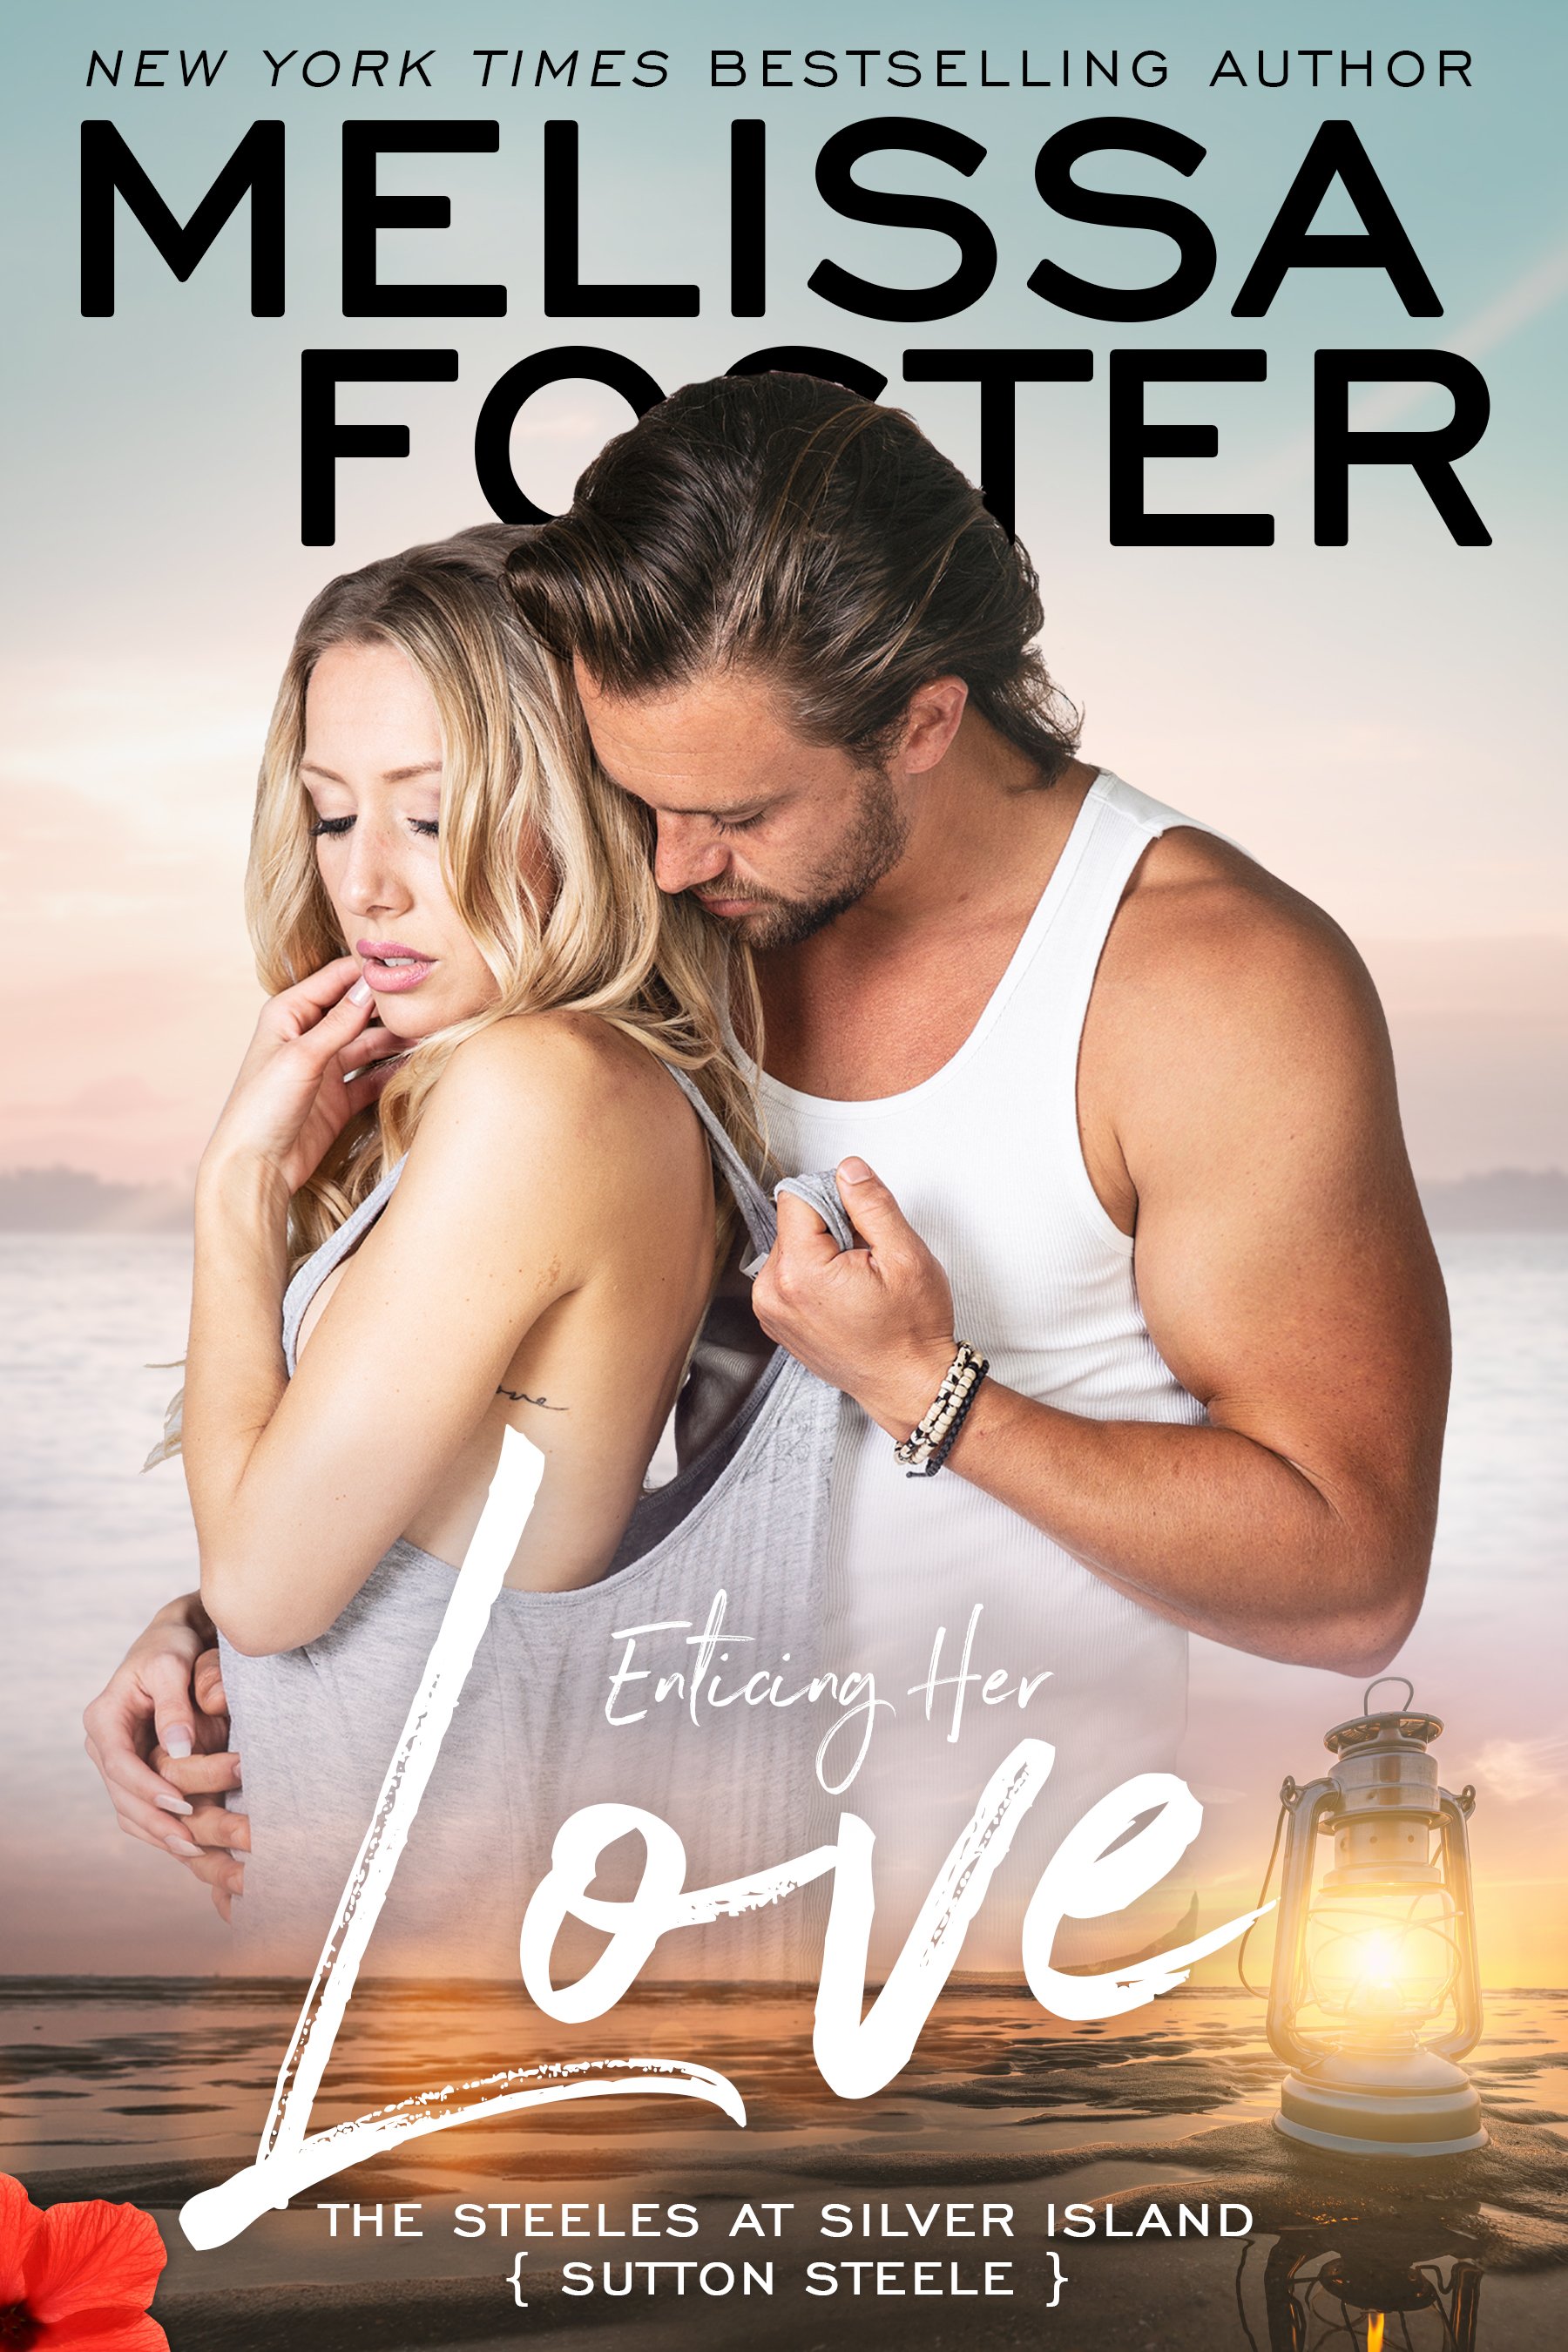 Enticing Her Love, The Steeles at Silver Island by Melissa Foster